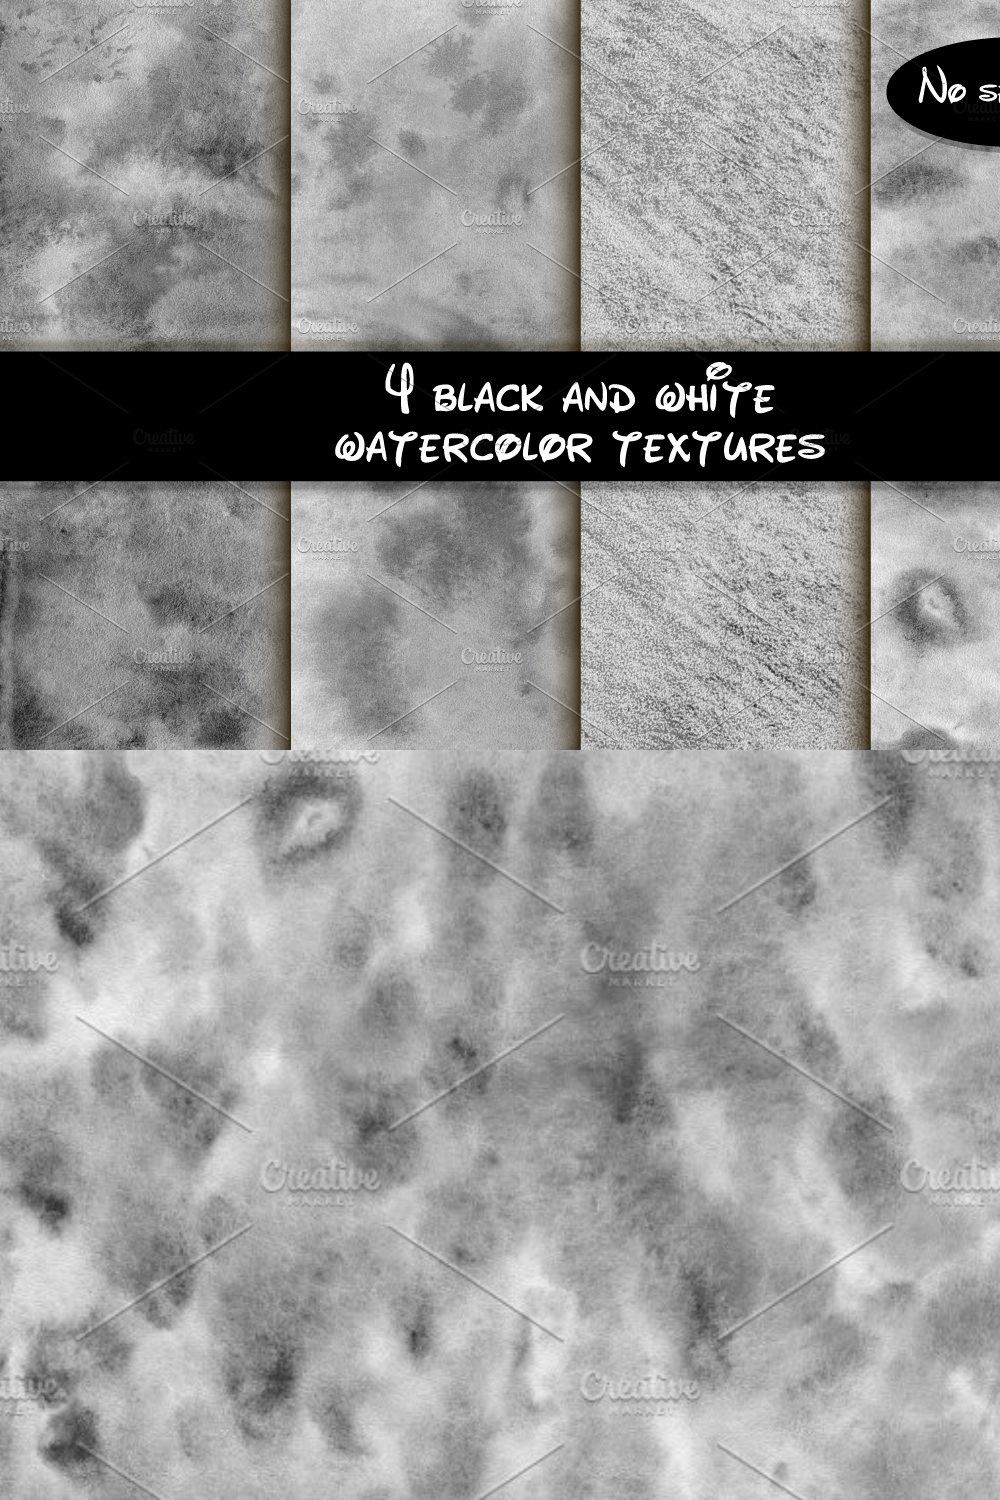 Black and white watercolor texture pinterest preview image.